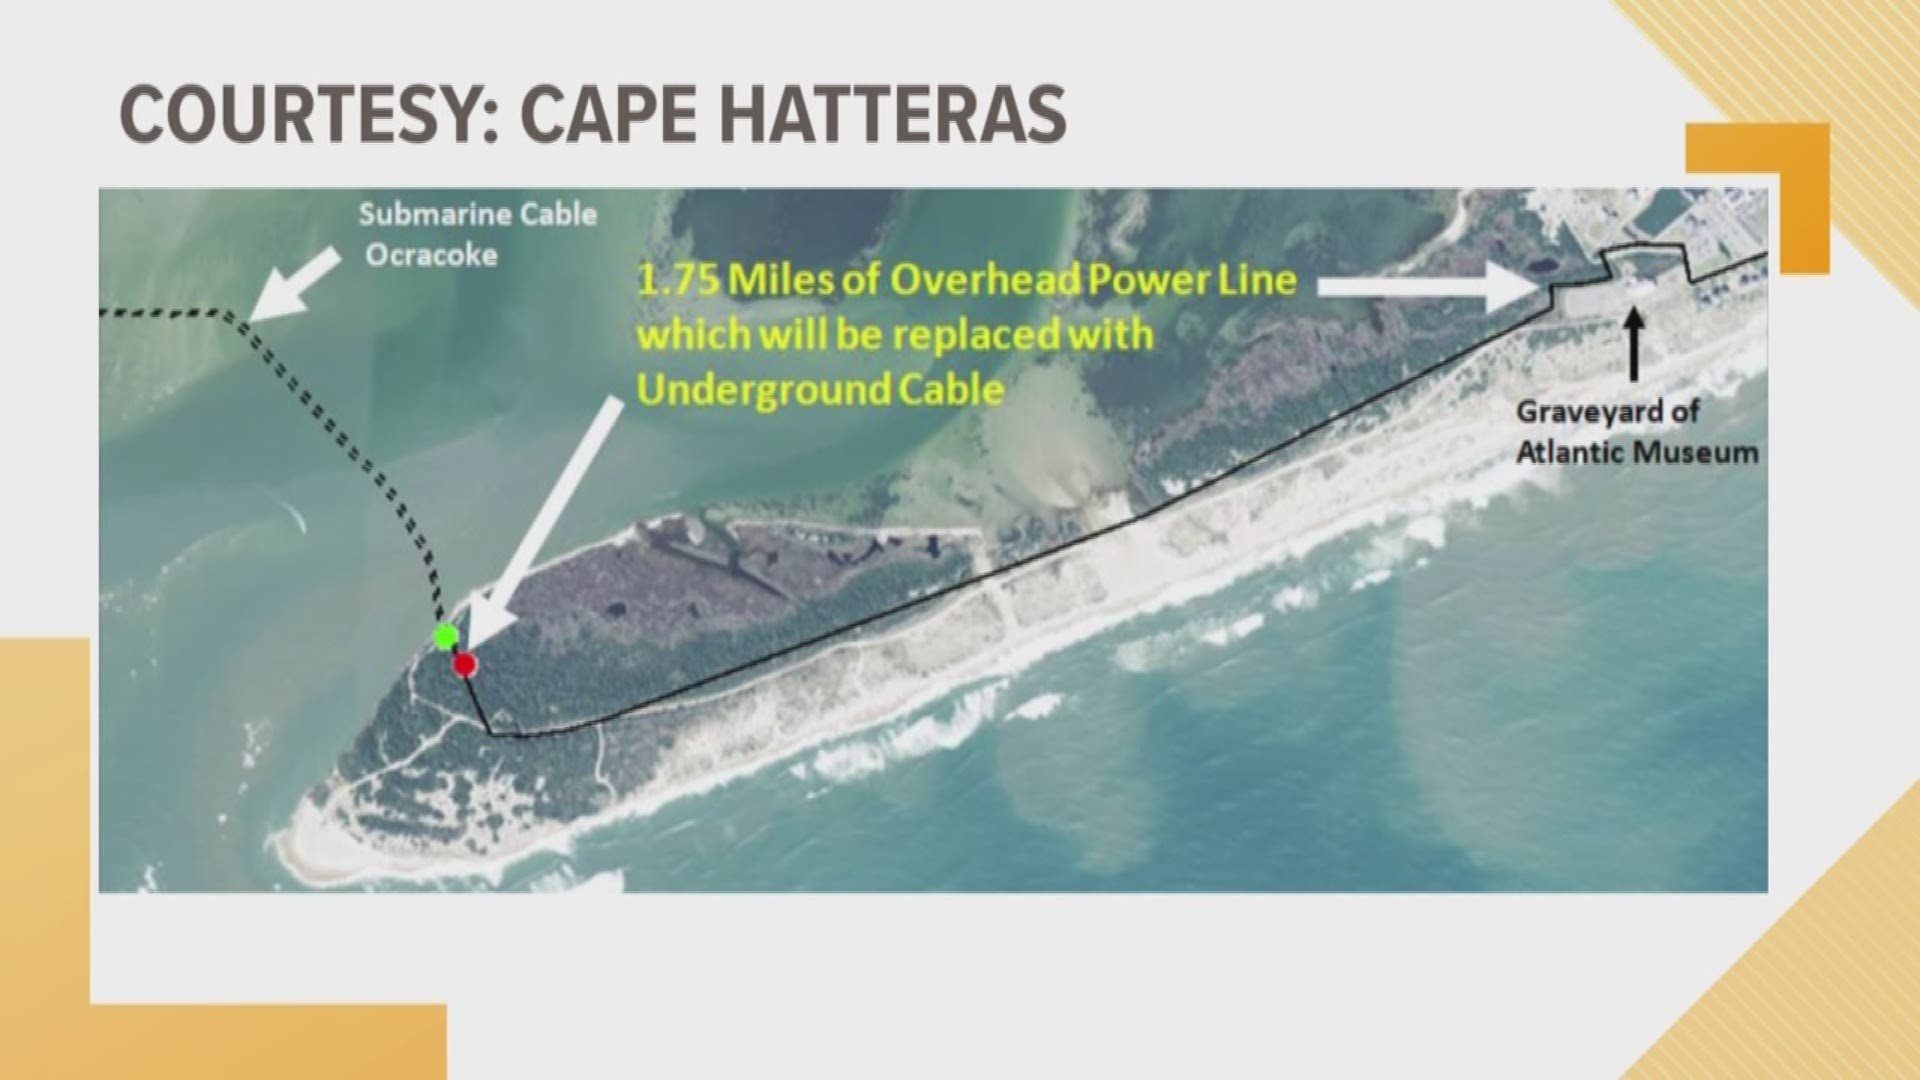 A project is scheduled to begin Jan. 2020 to improve electricity reliability on Ocracoke Island. The project is slated to take two months.